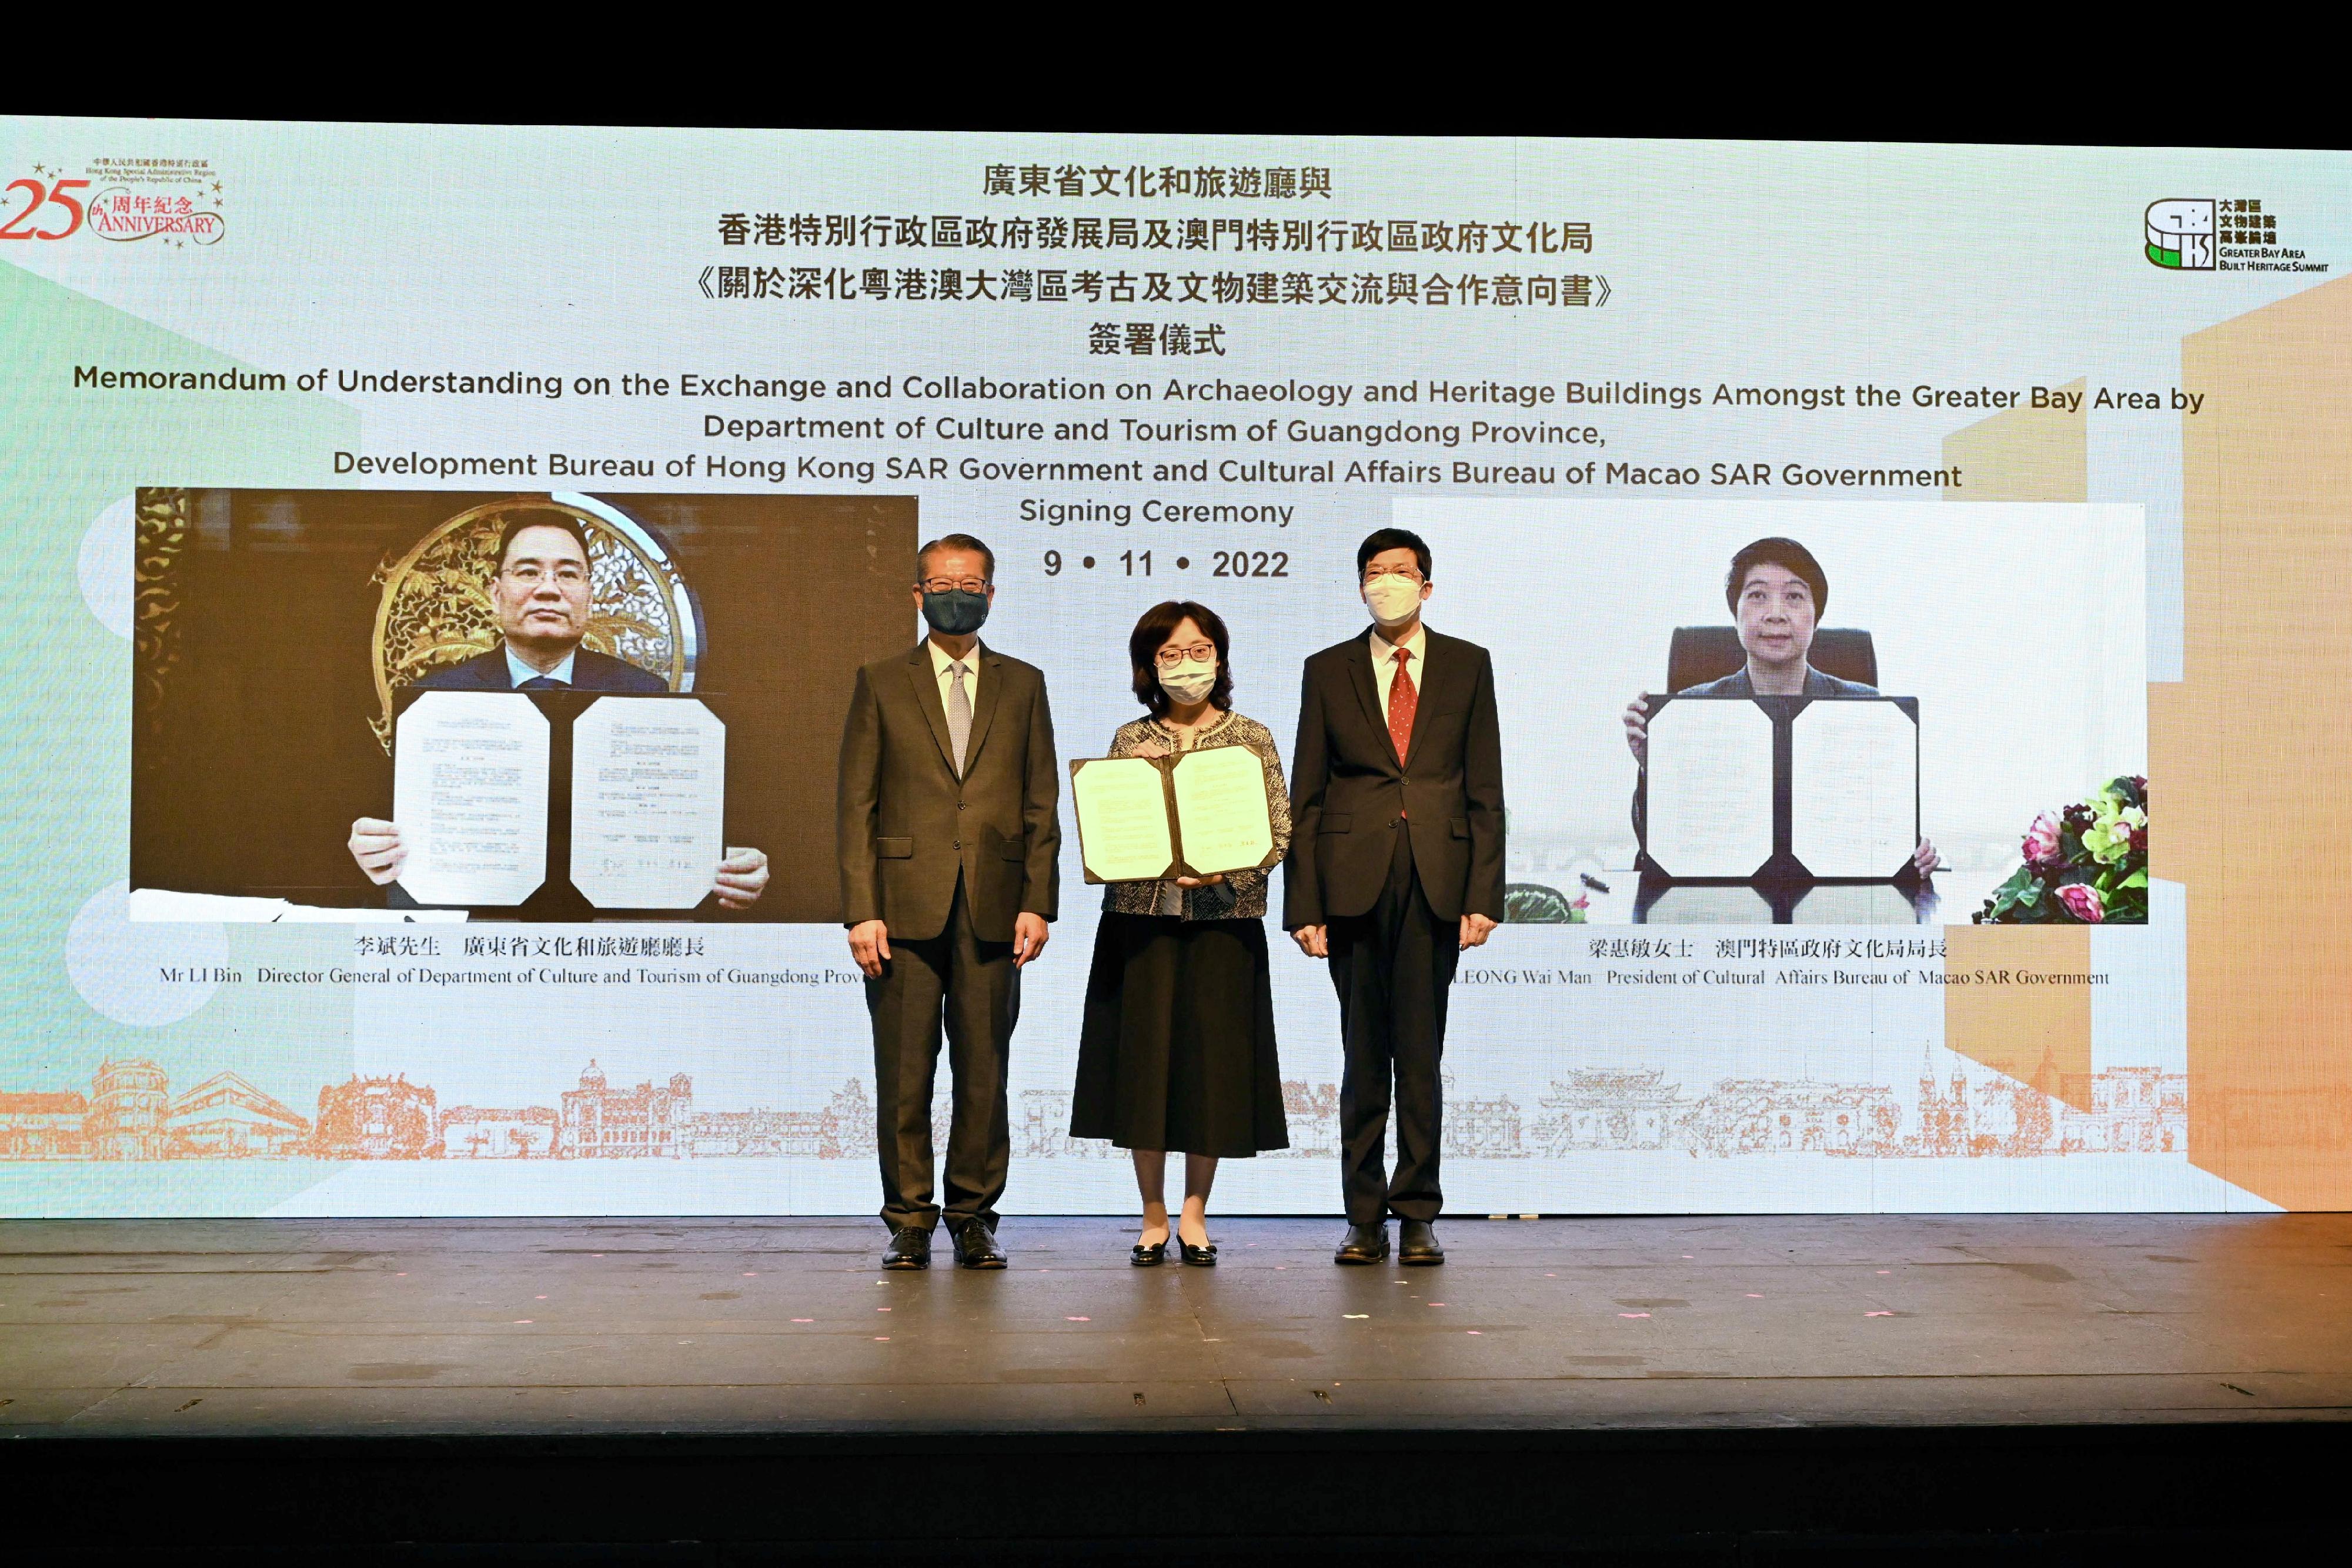 Jointly organised by the Commissioner for Heritage's Office and the Antiquities and Monuments Office under the Development Bureau, the Greater Bay Area Built Heritage Summit 2022 opened at Hong Kong City Hall today (November 9). Photo shows the Secretary for Development, Ms Bernadette Linn (centre), the Director General of Department of Culture and Tourism of Guangdong Province, Mr Li Bin (left on screen); and the President of Cultural Affairs Bureau of Macao Special Administrative Region, Ms Leong Wai-man (right on screen) signing Memorandum of Understanding on the Collaboration and Exchange on Cultural and Archaeological Heritage amongst the Greater Bay Area, witnessed by the Financial Secretary, Mr Paul Chan (left), and Deputy Administrator of the National Cultural Heritage Administration Mr Lu Jin (right).